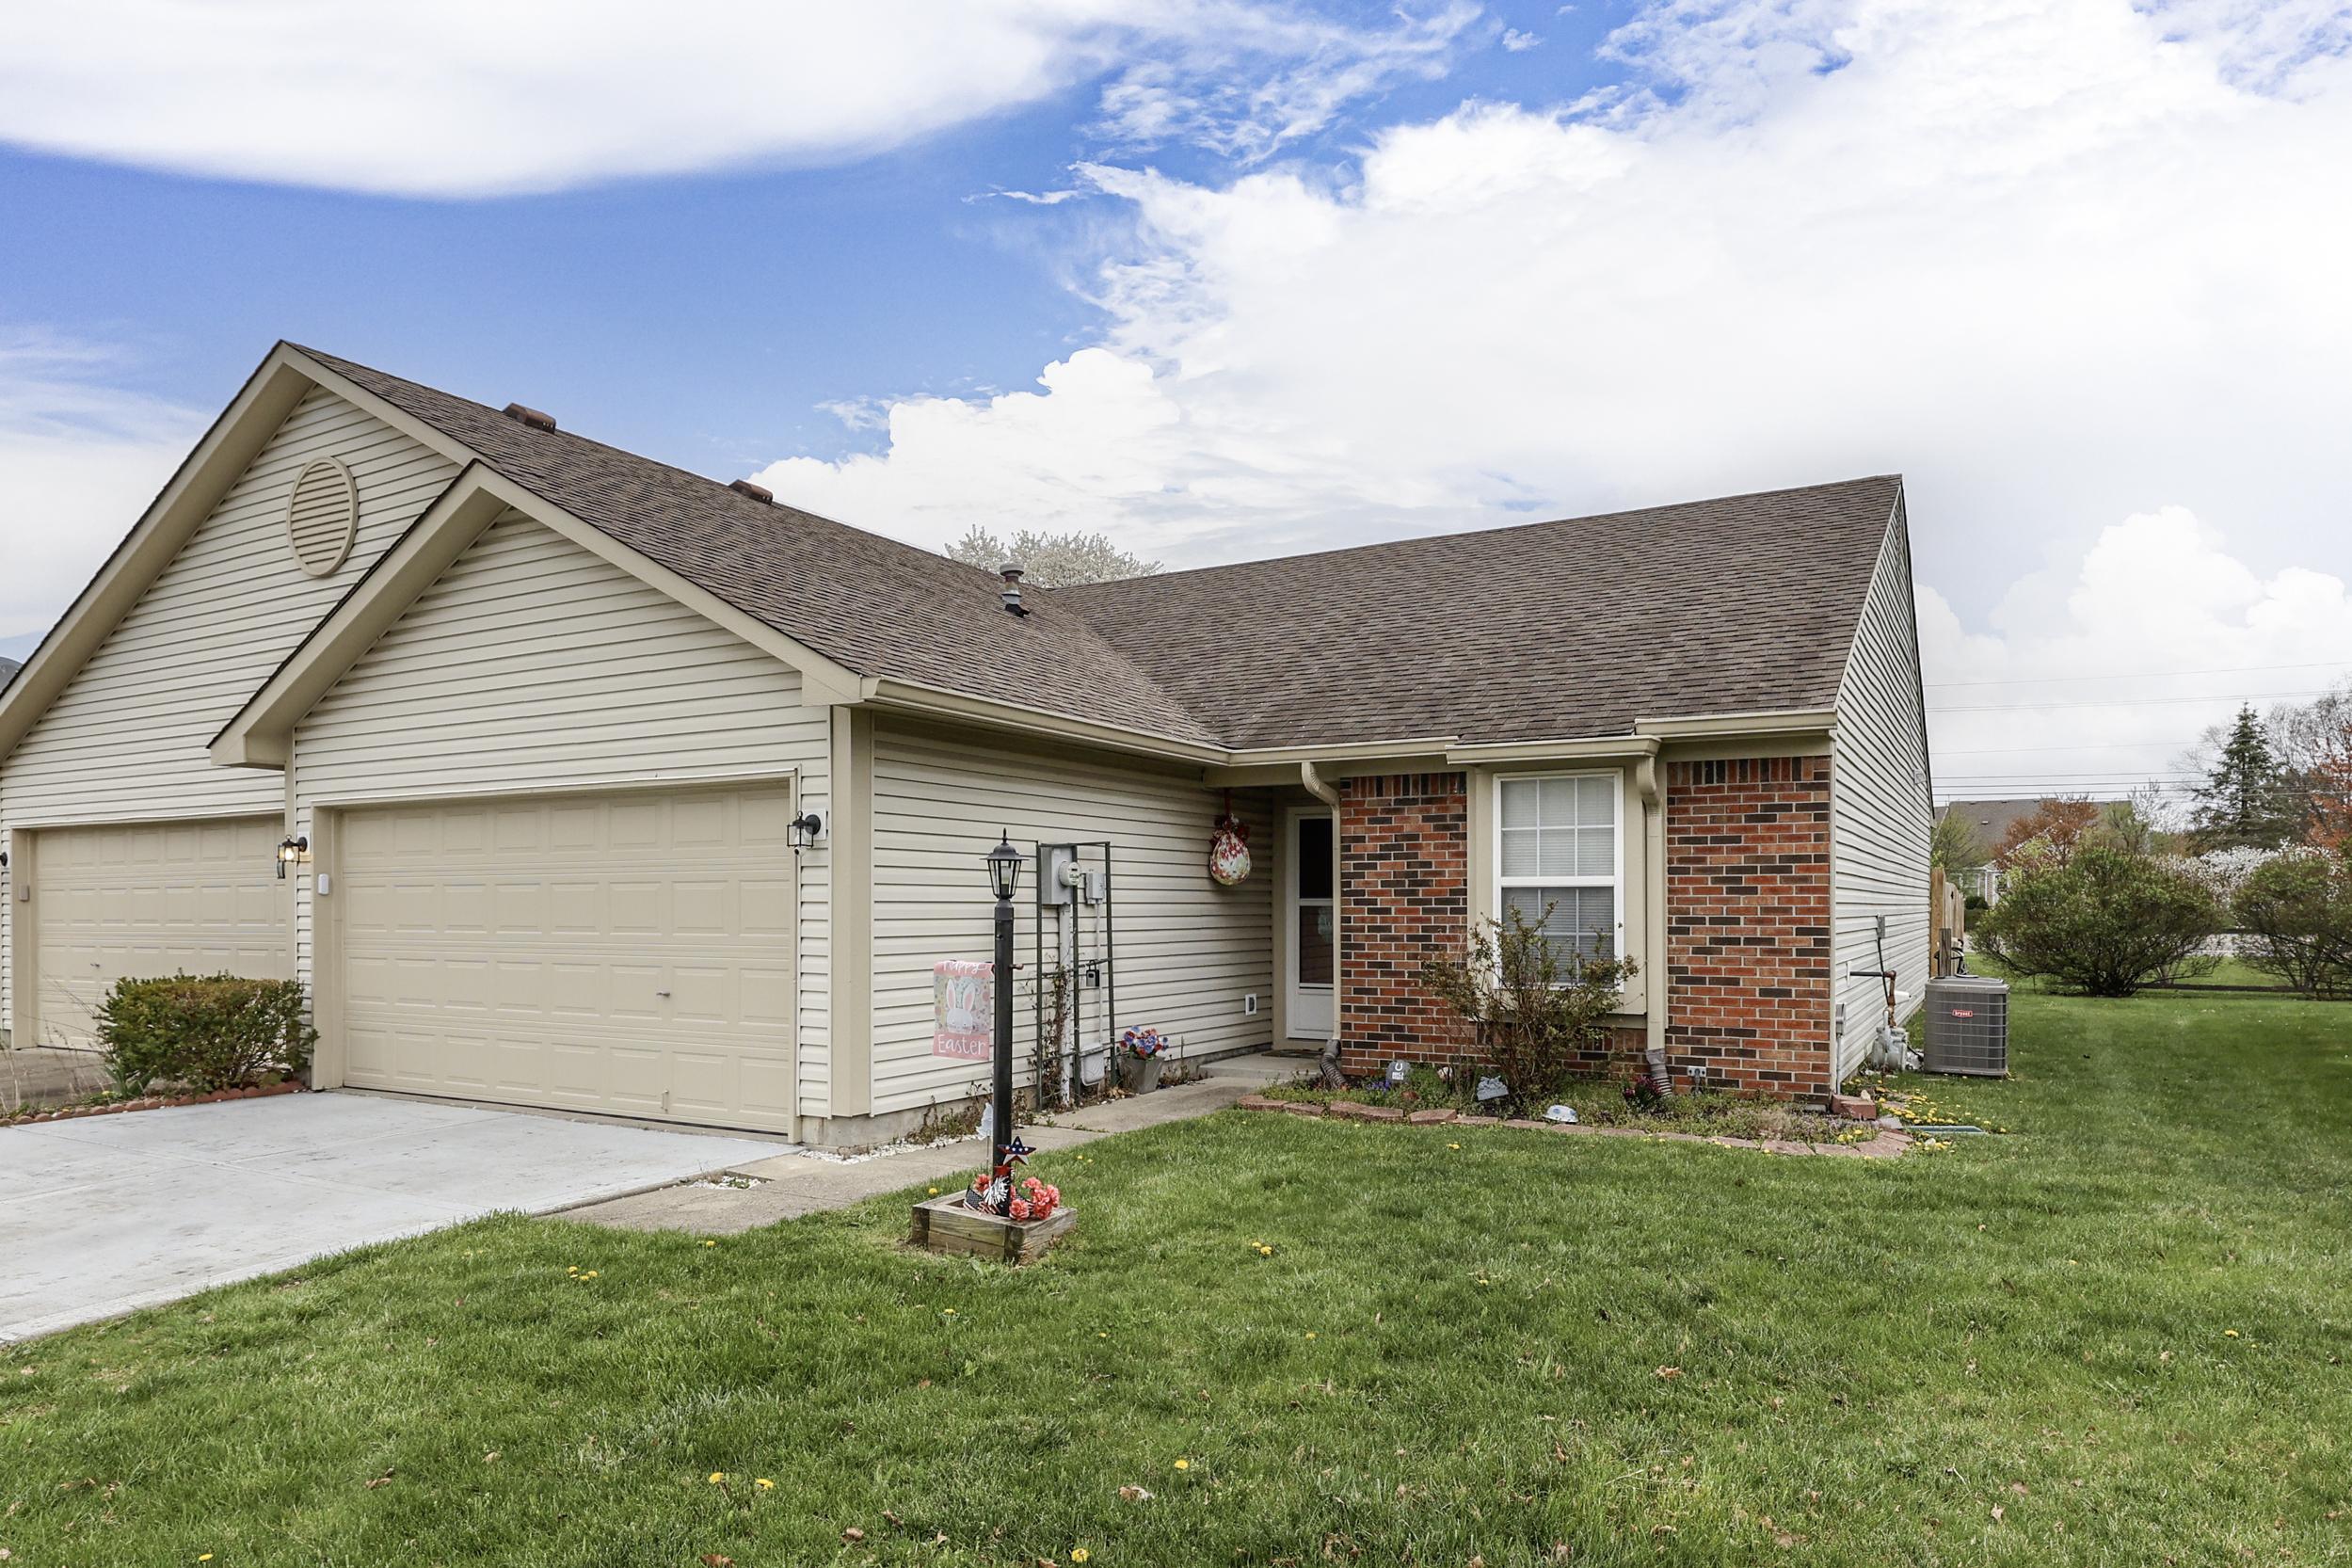 Photo one of 7251 Broyles Ln Indianapolis IN 46217 | MLS 21971446